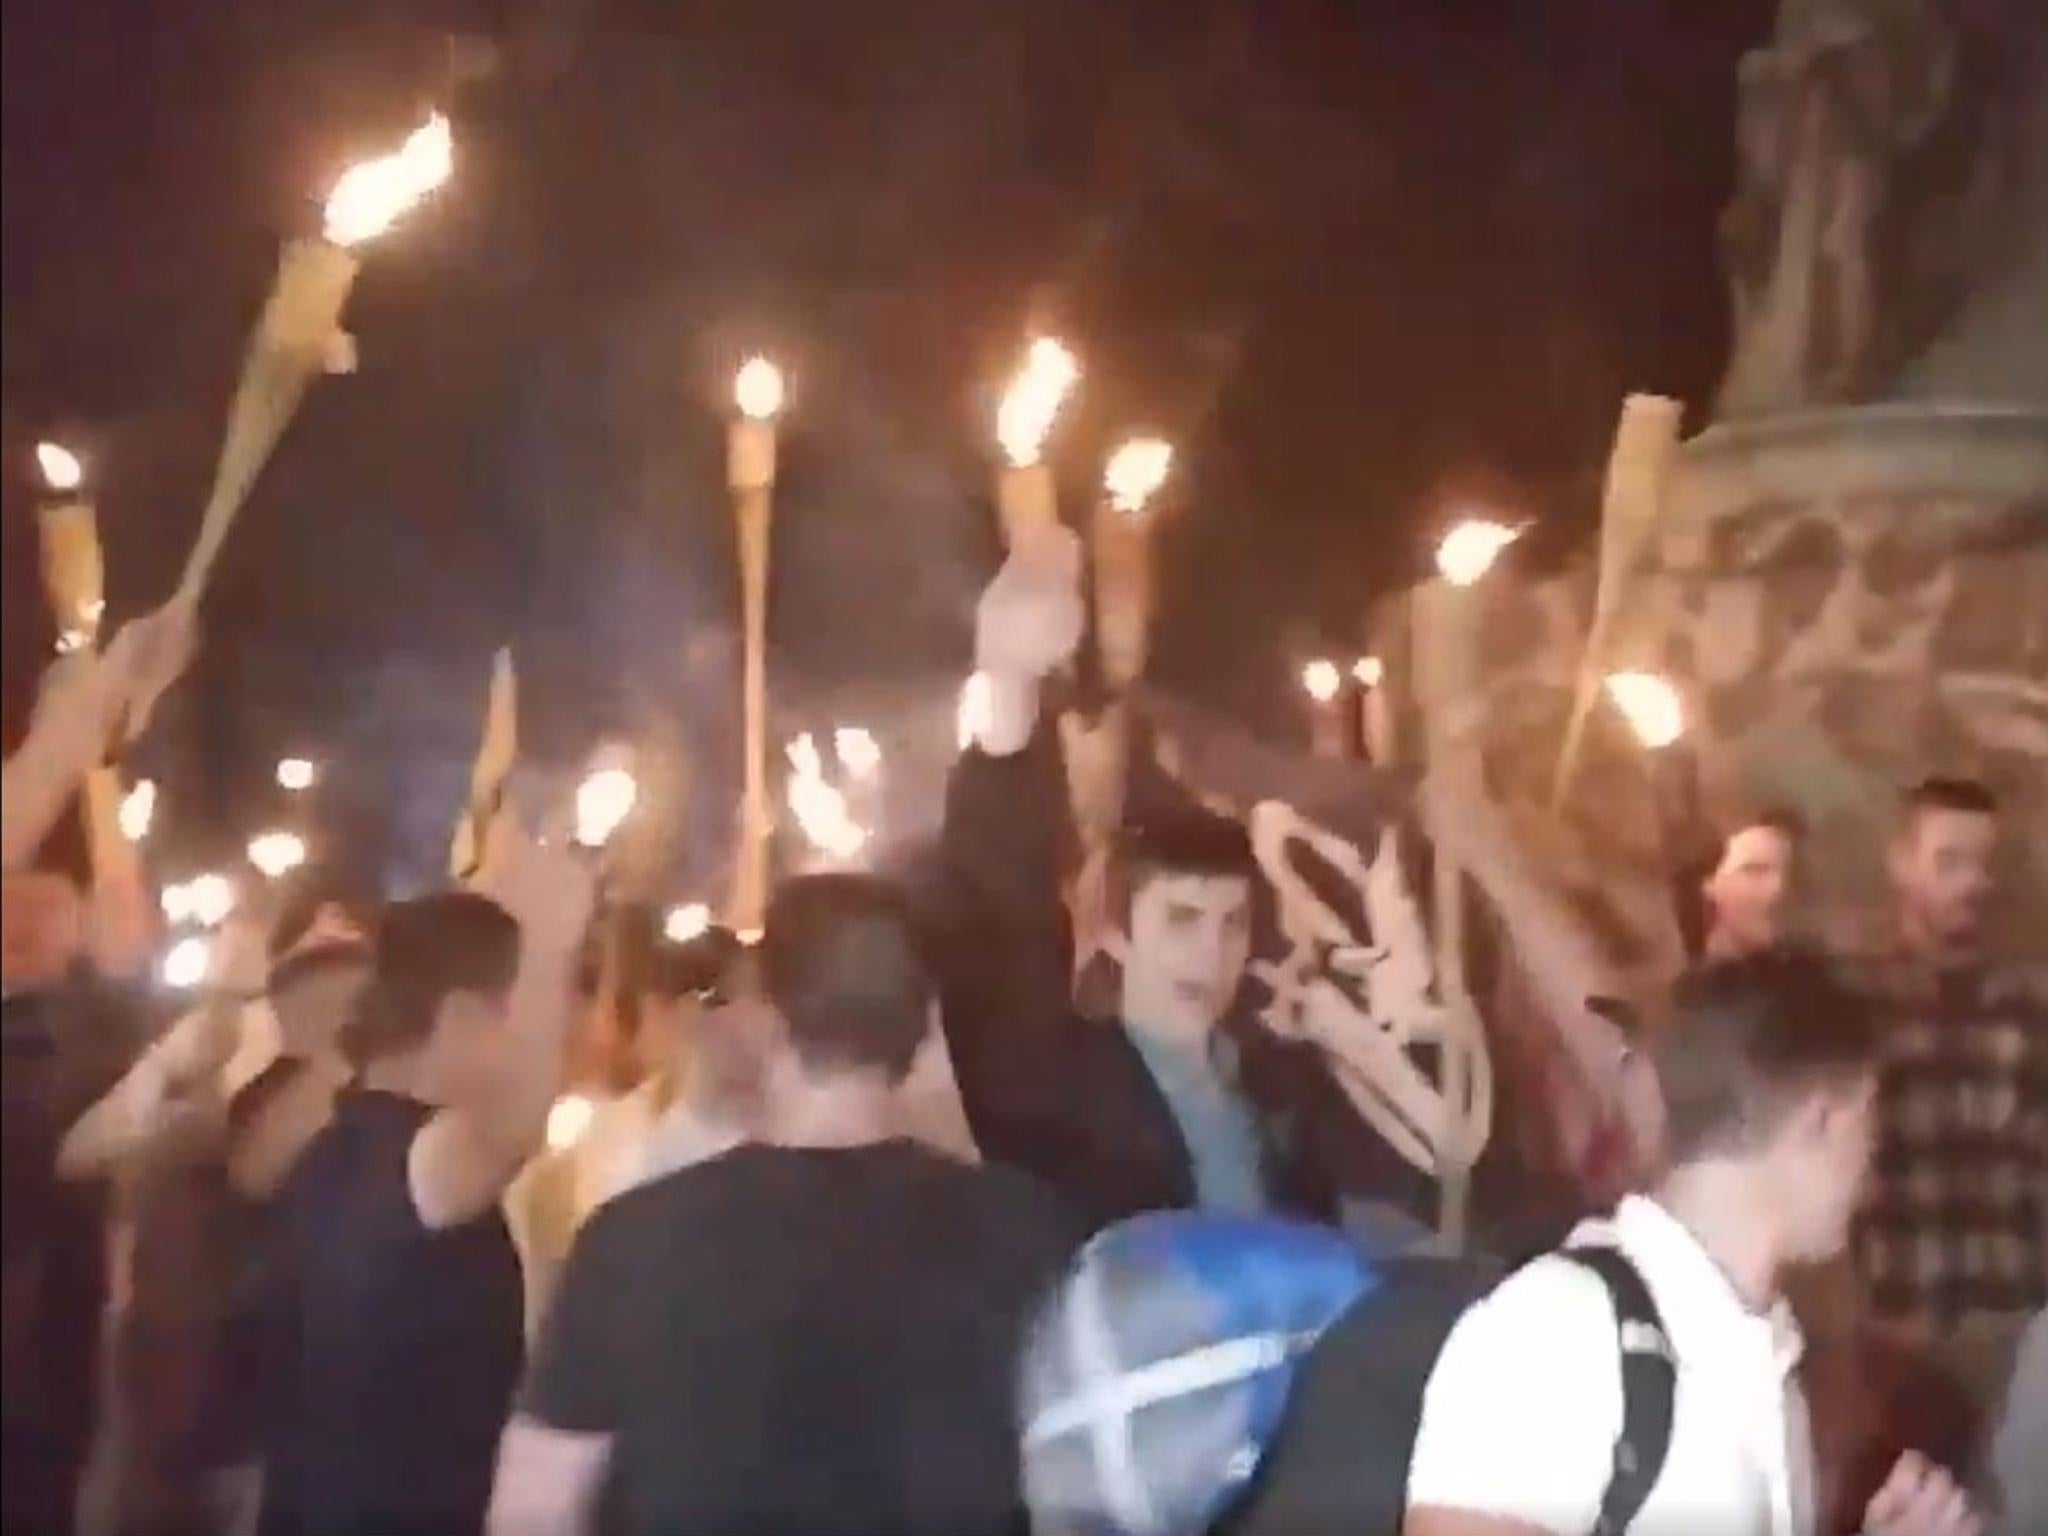 White nationalist protesters carried torches and performed Nazi salutes at the University of Virginia